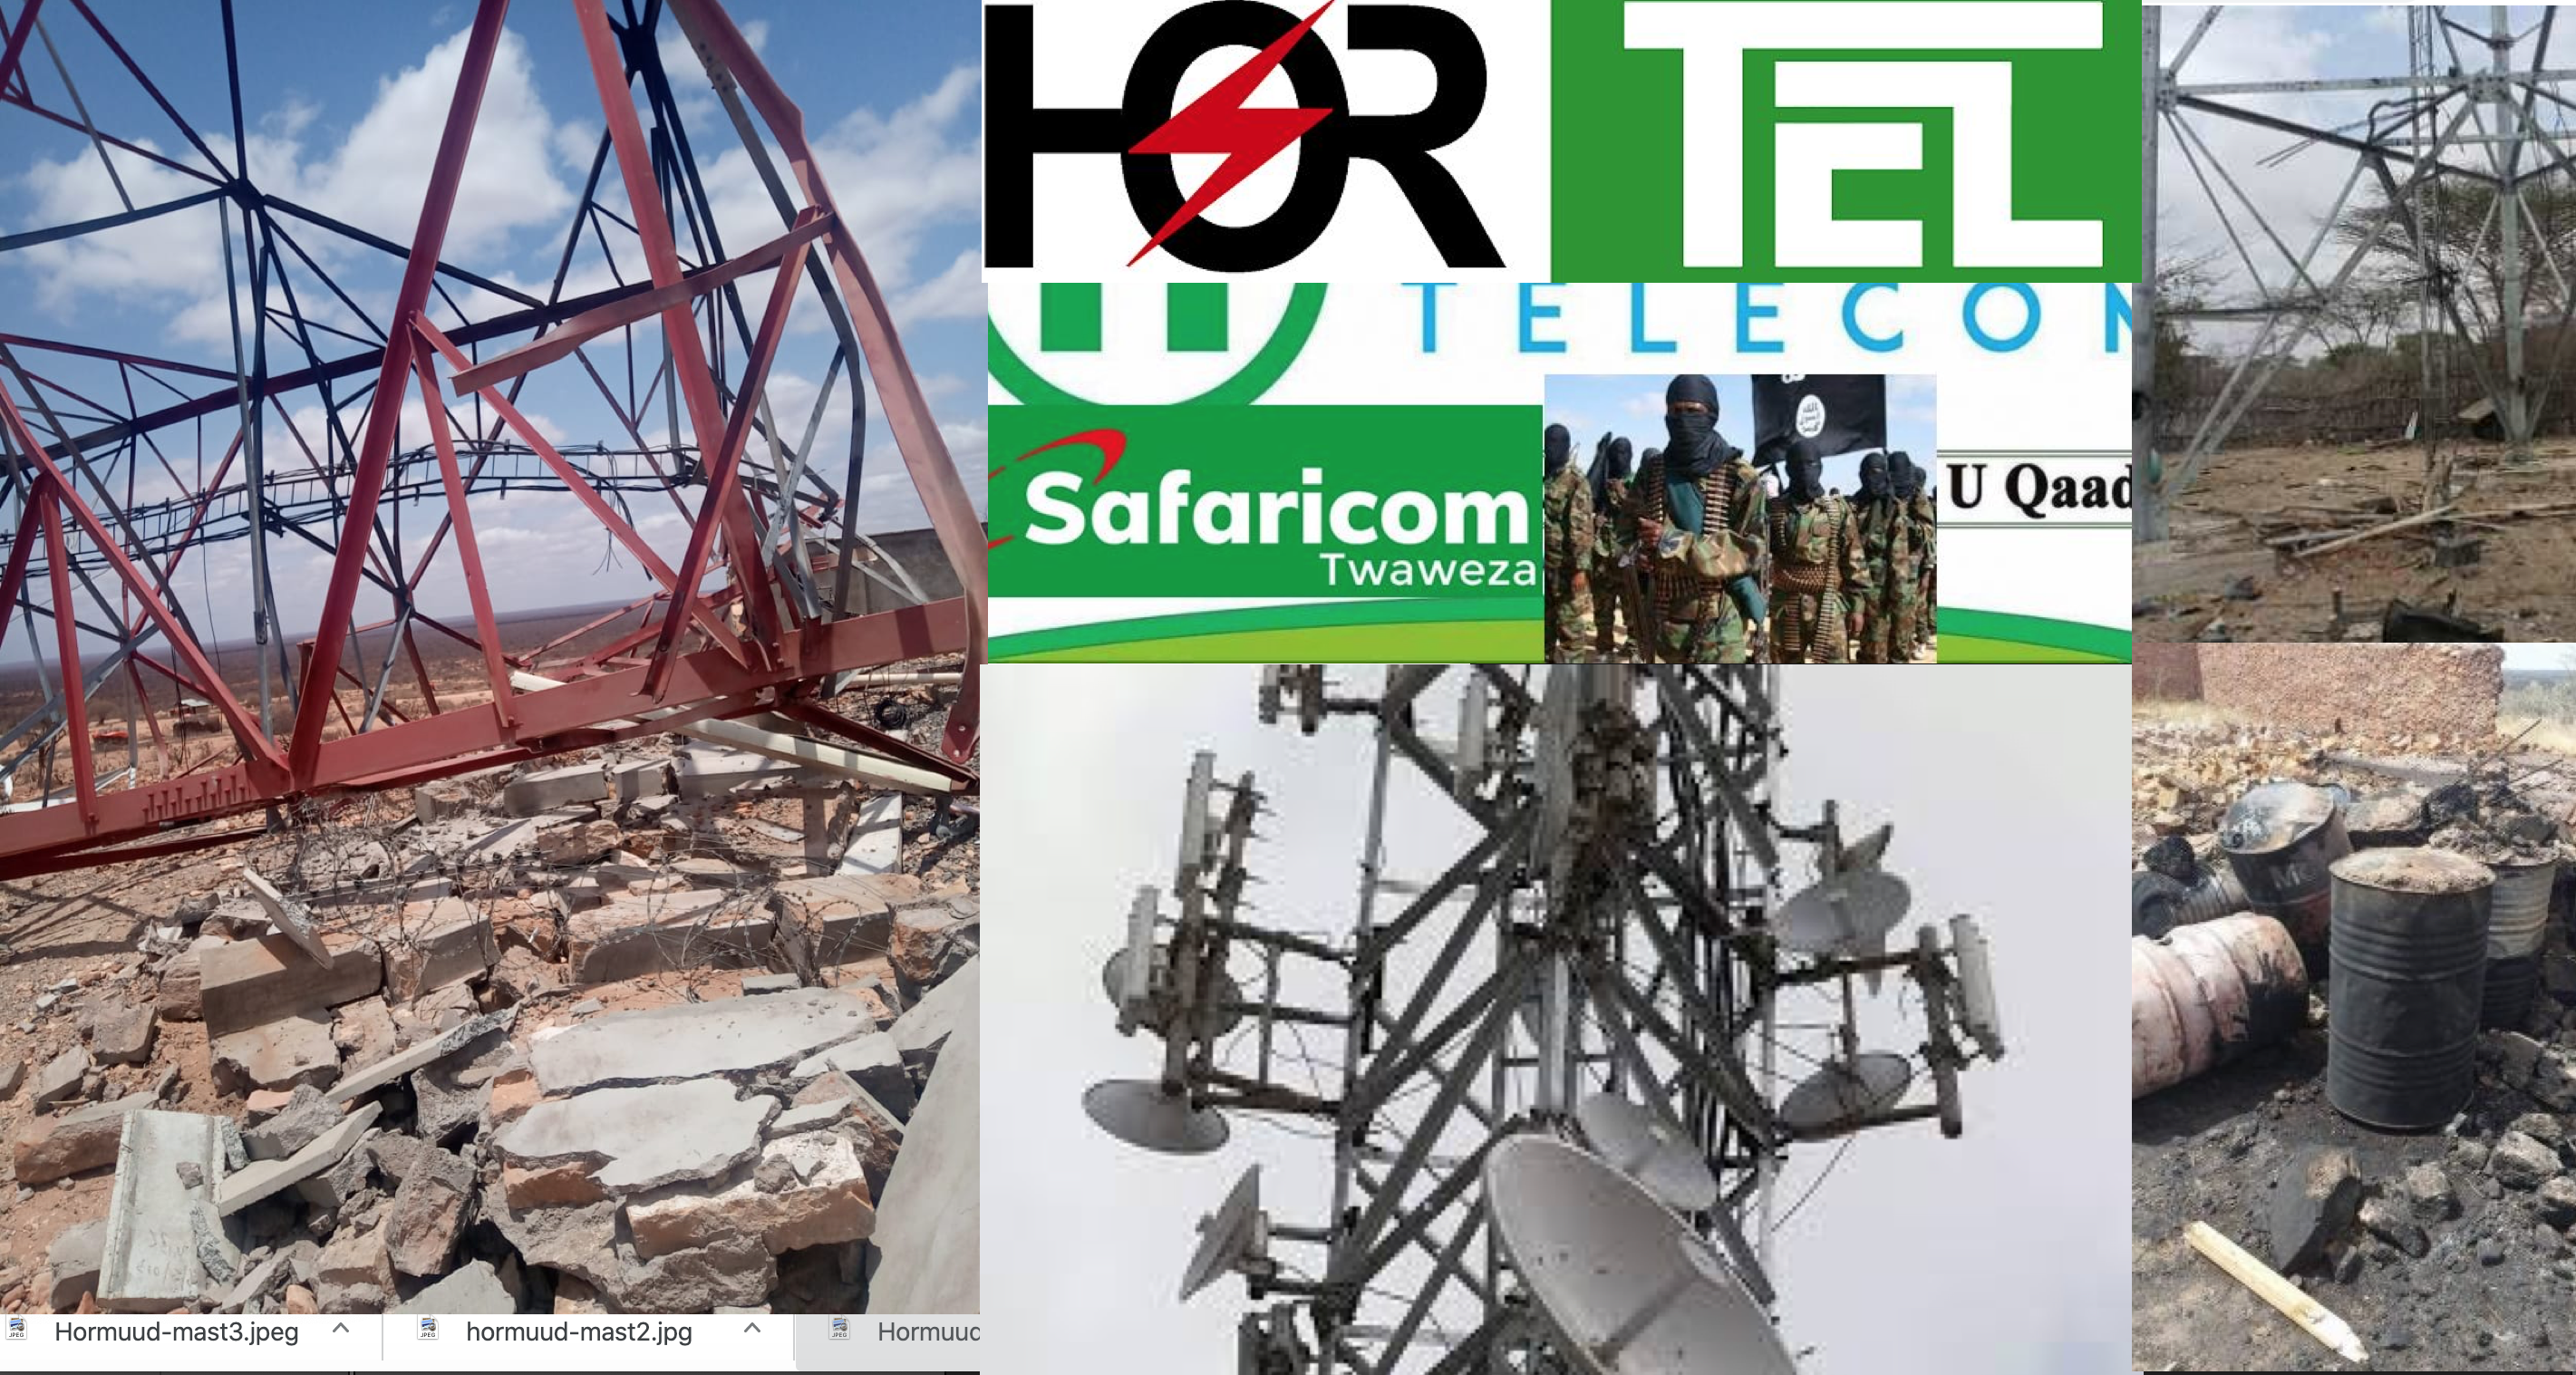 Hormuud telecom and Al-Shabaab's Strategy of Destroying Mobile Communication Masts